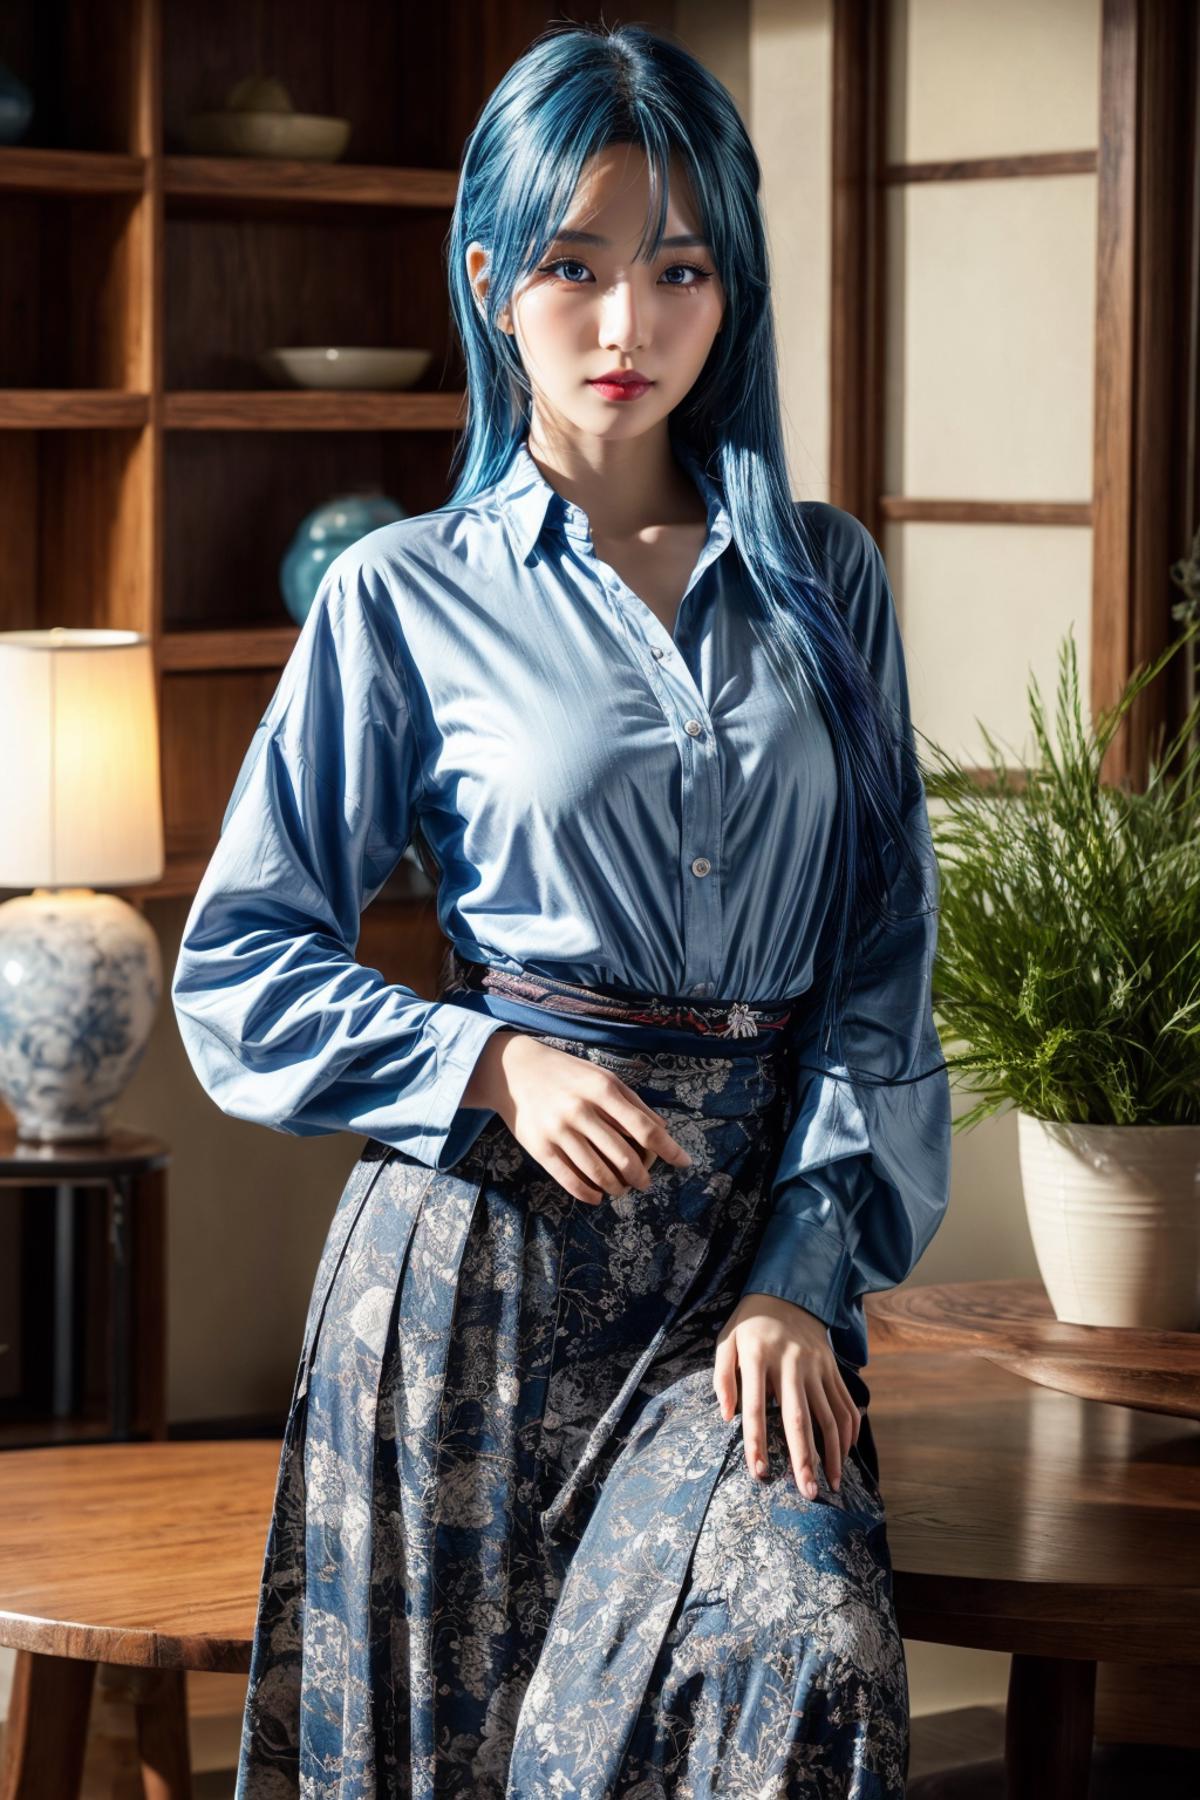 Shirt and Long Skirt By Stable Yogi image by Godkiller477